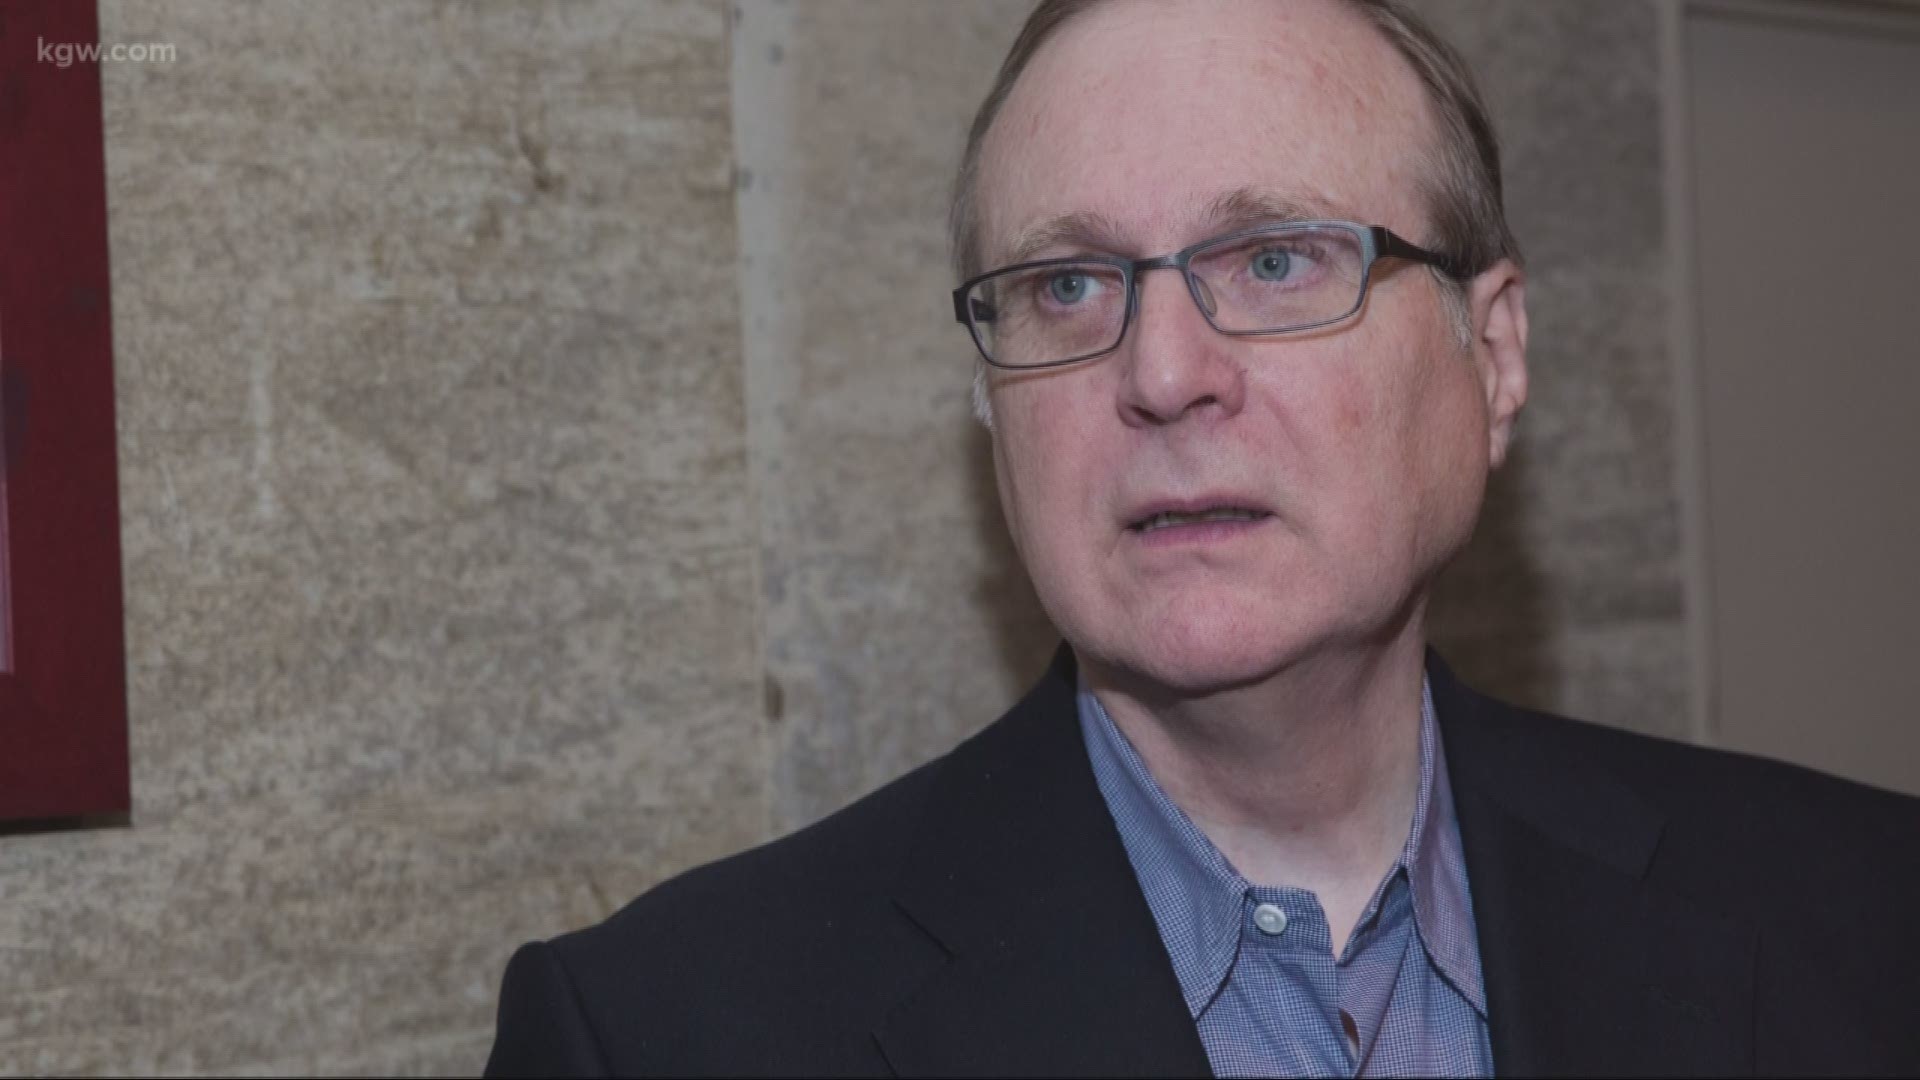 A look back at Paul Allen's legacy in the world's of business, sports and technology.